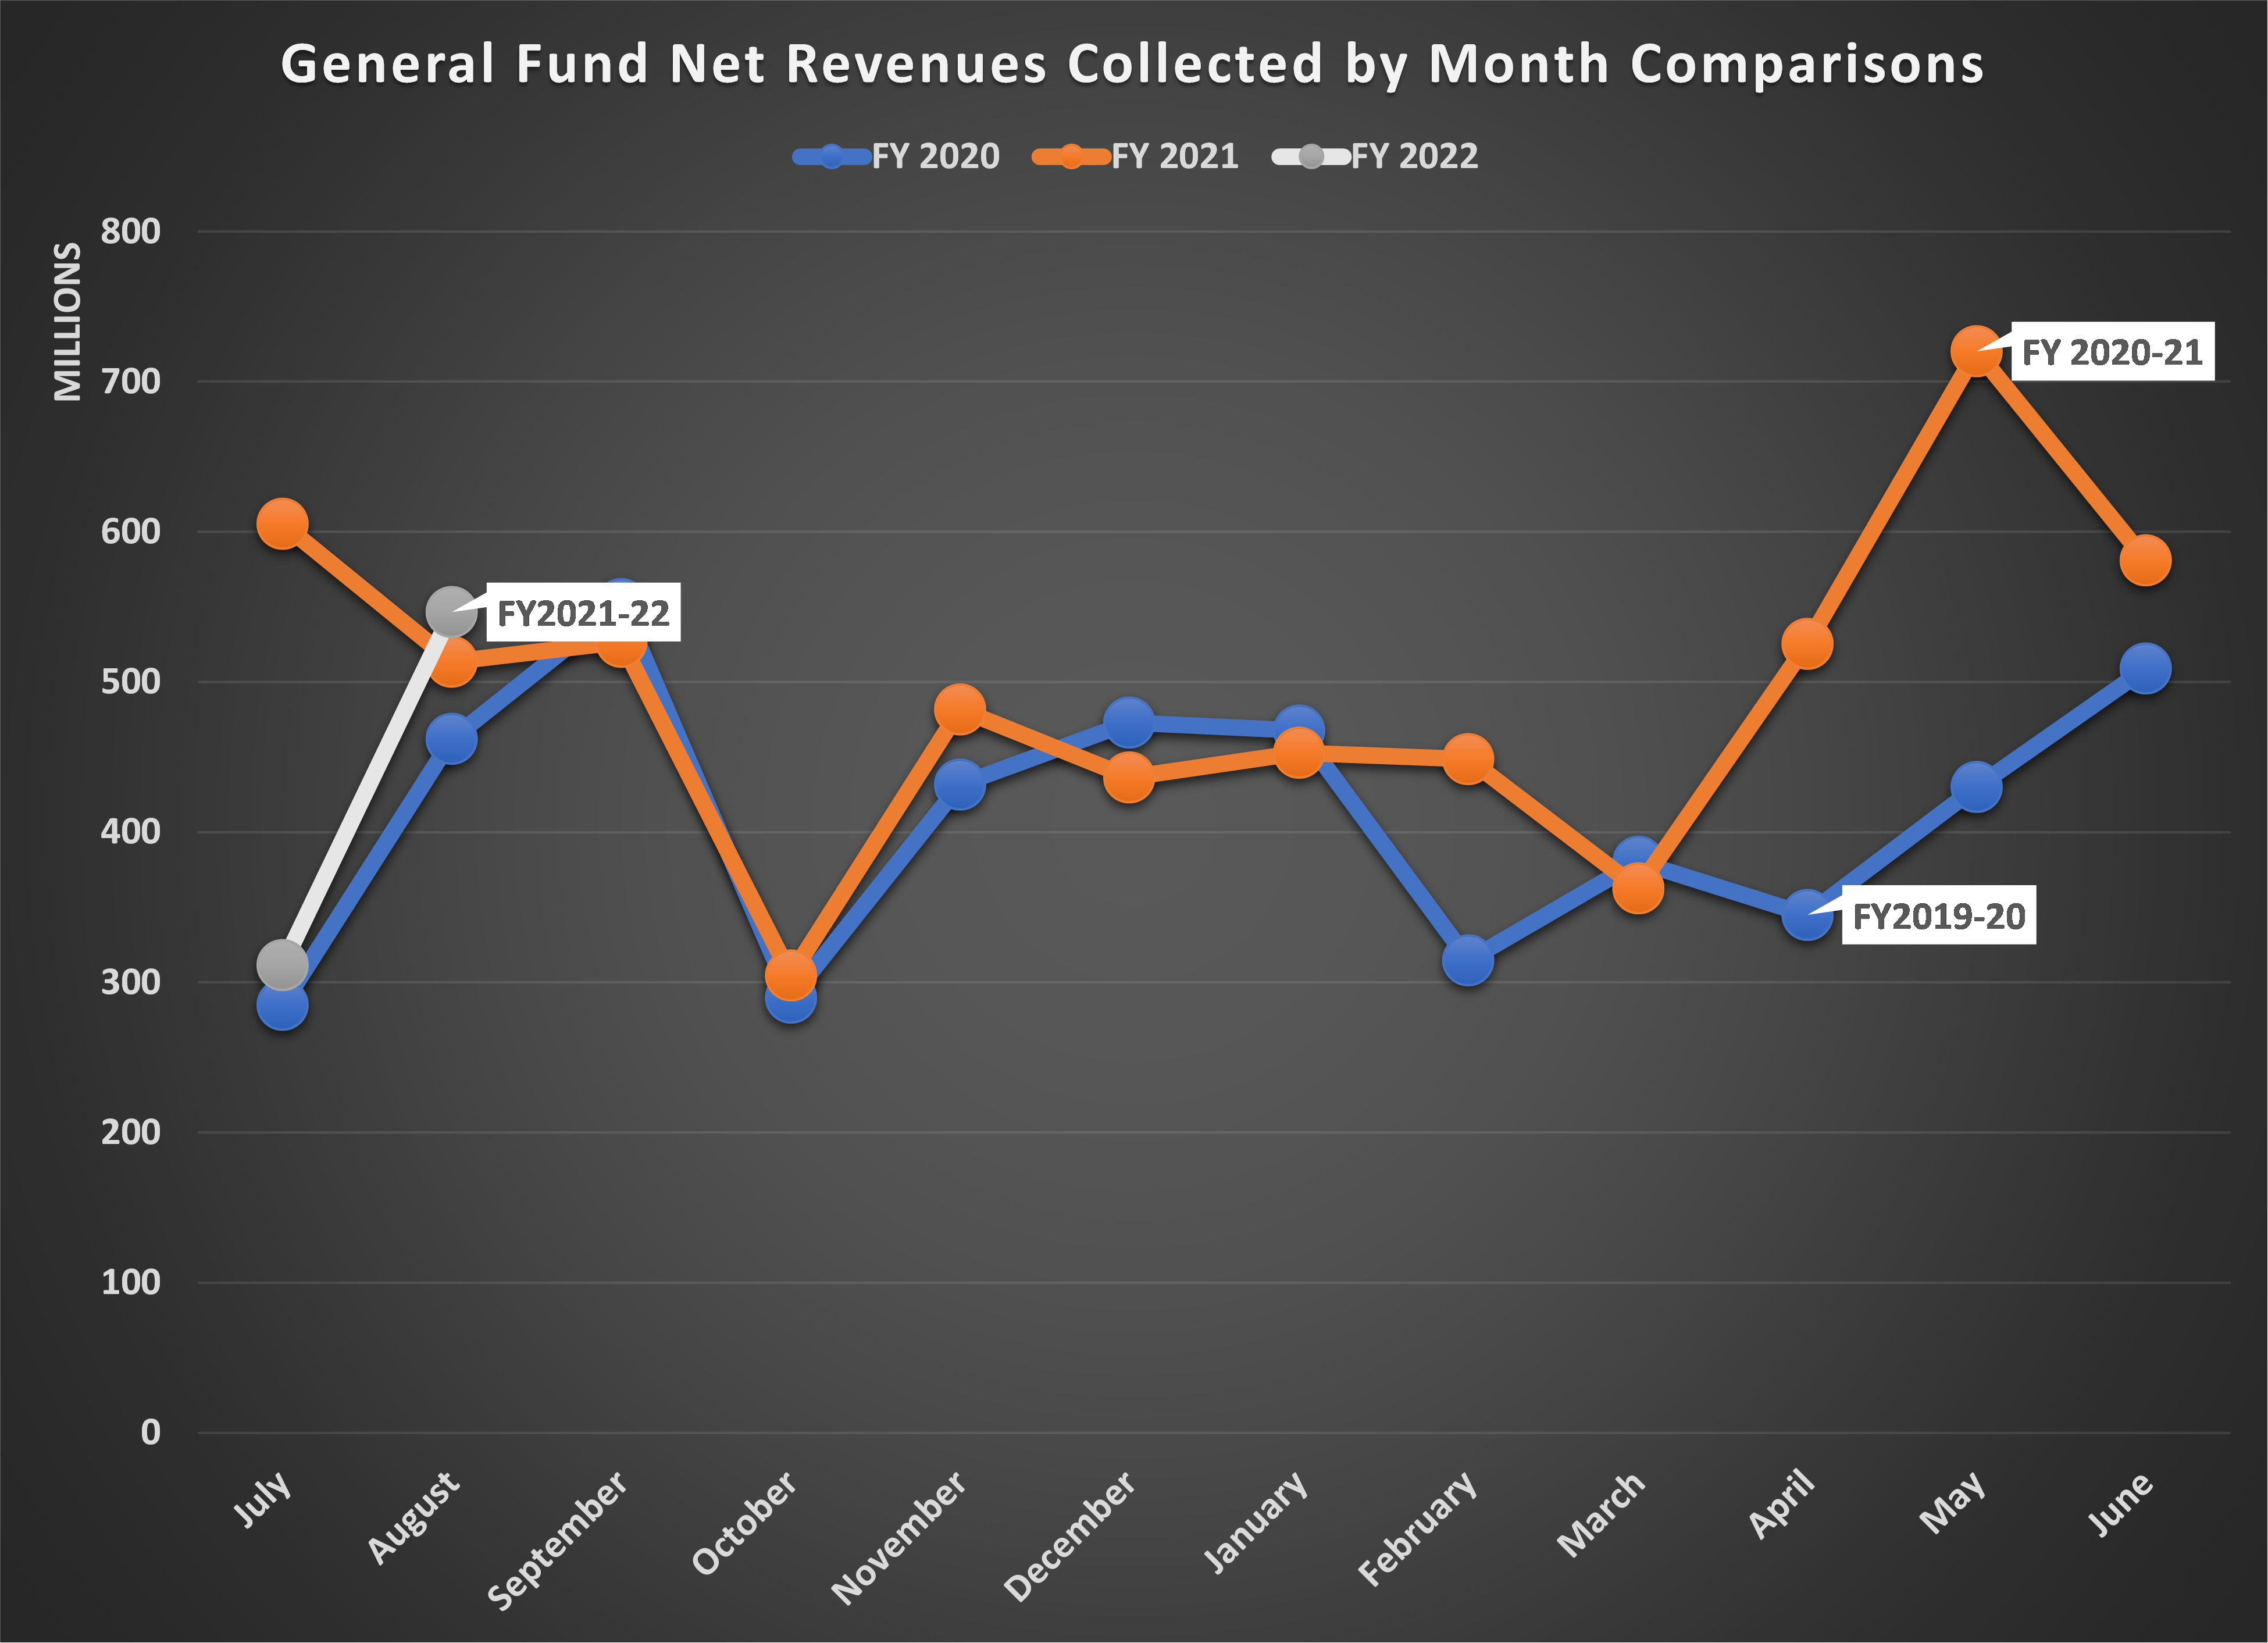 A chart showing General Fund Net Revenues Collected by Month for the 2019-20, 2020-21, and 2021-22 fiscal years. Revenues in July 2020 were abnormally high compared to the previous and current years due to a tax filing deadline change, but revenues for August 2021 are consistent with past years, slightly higher than 2020, which is also slightly higher than 2019.